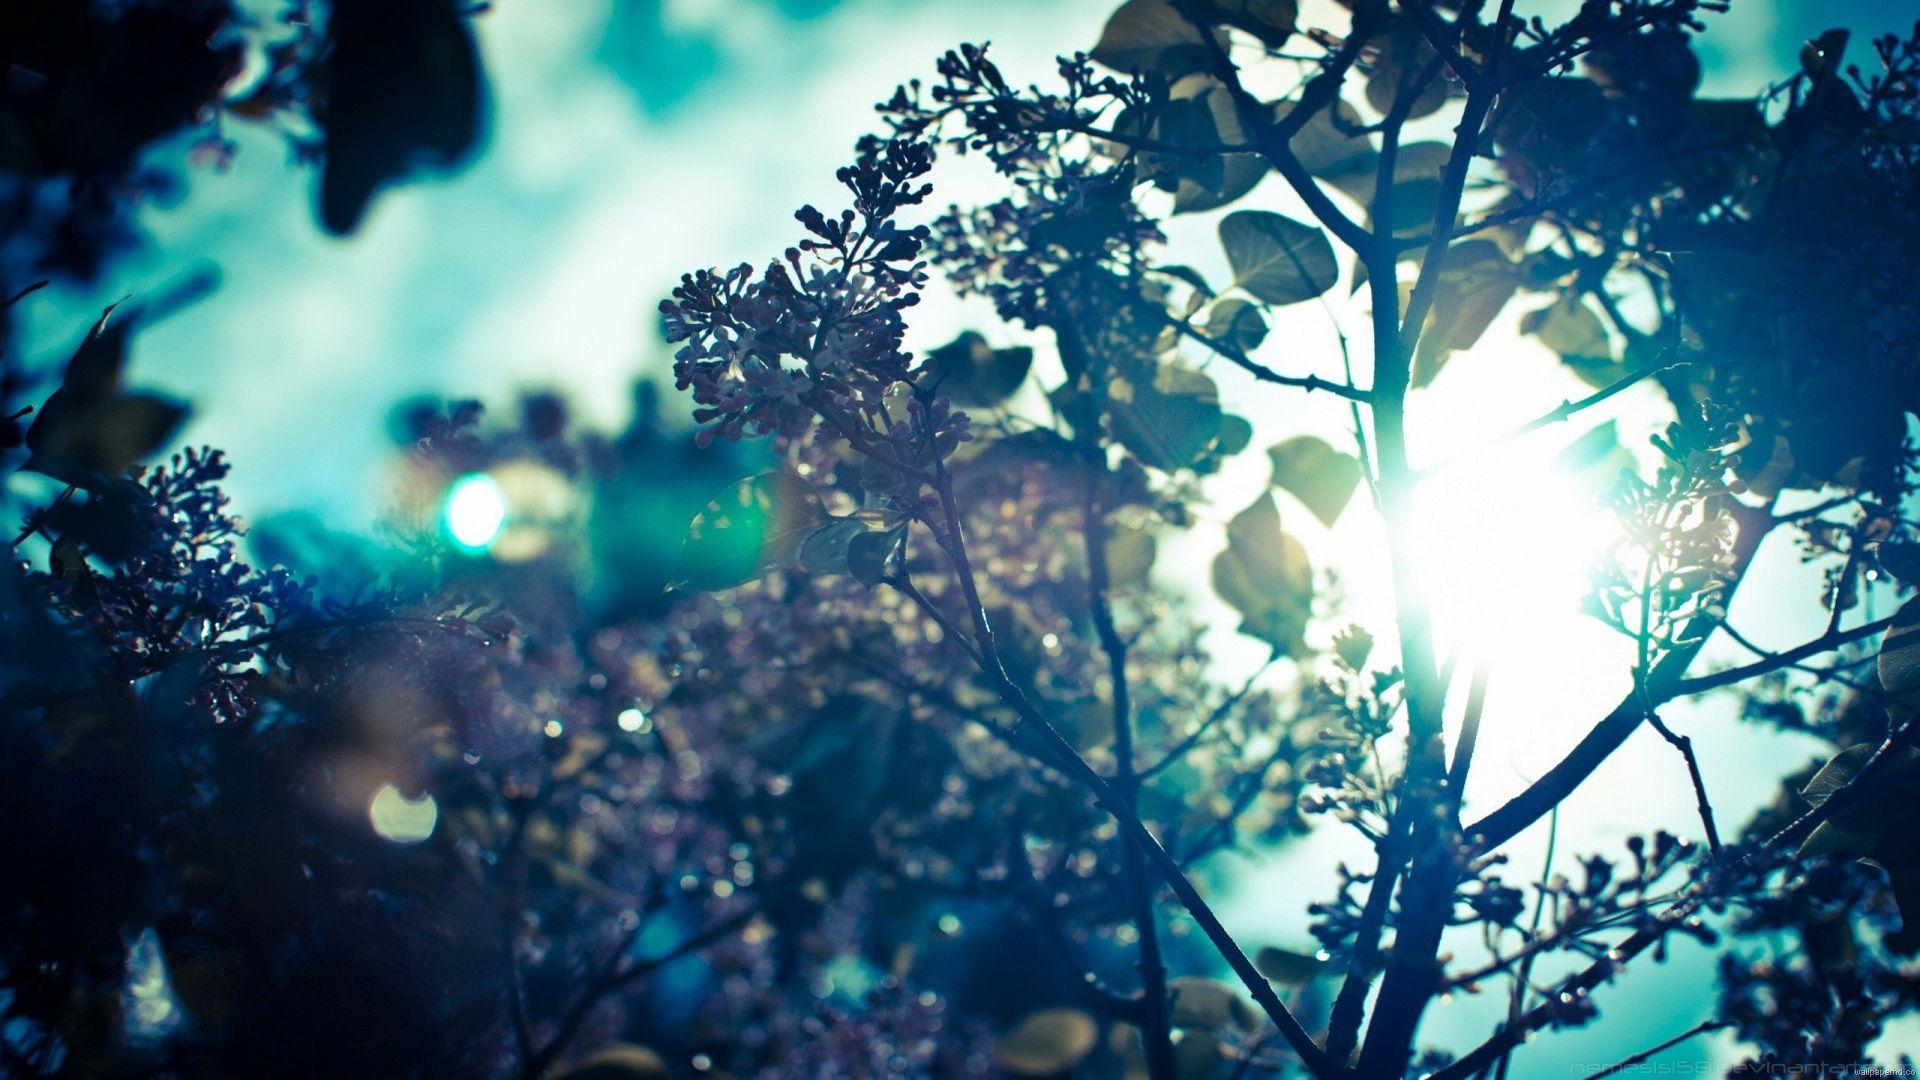 background tumblr hipster free picture, image background tumblr